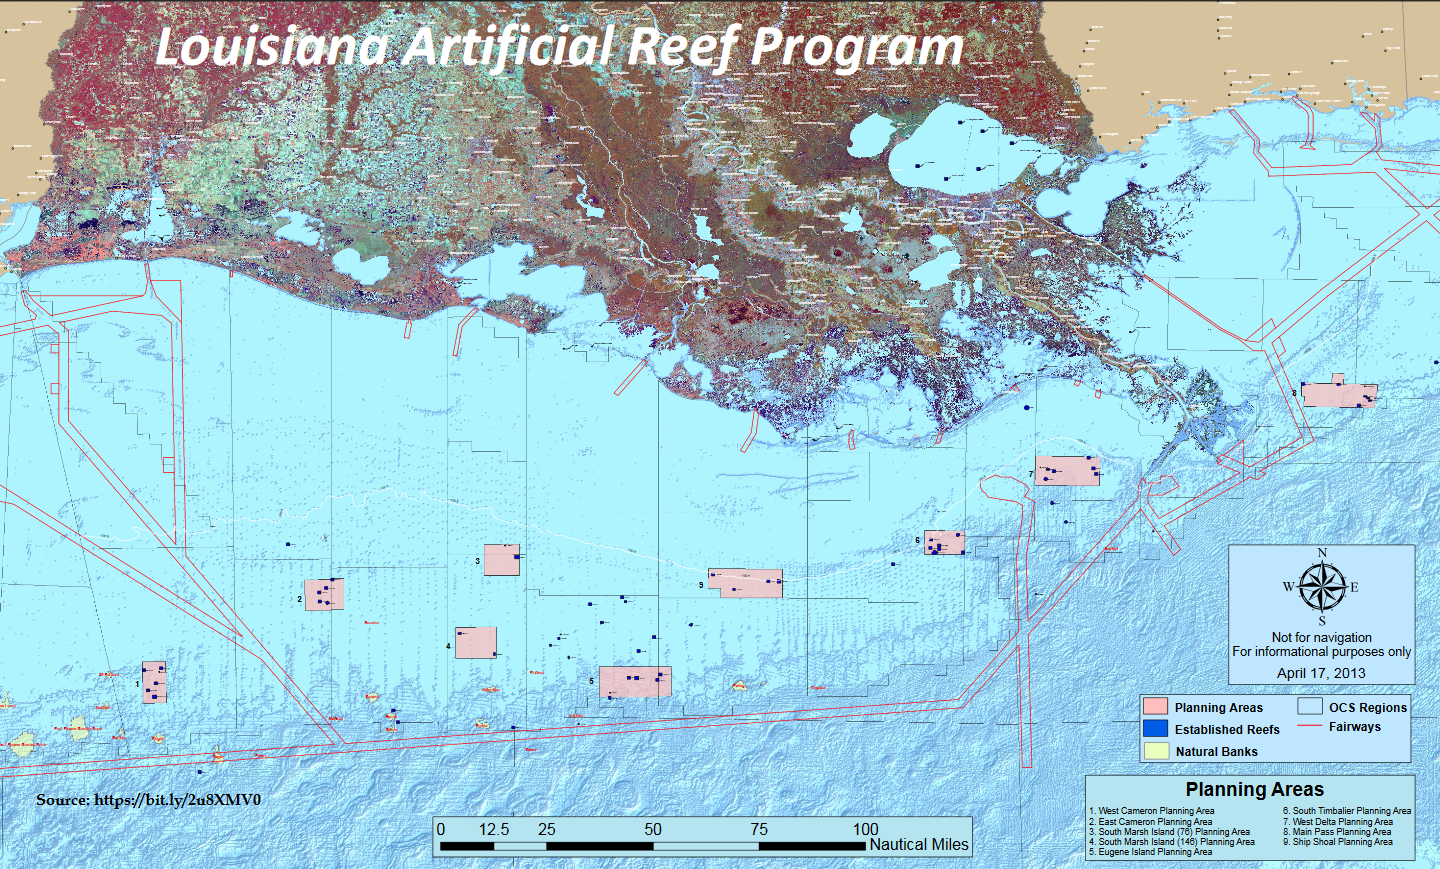 World’s largest artificial reef: world record off Grand Isle, Louisiana